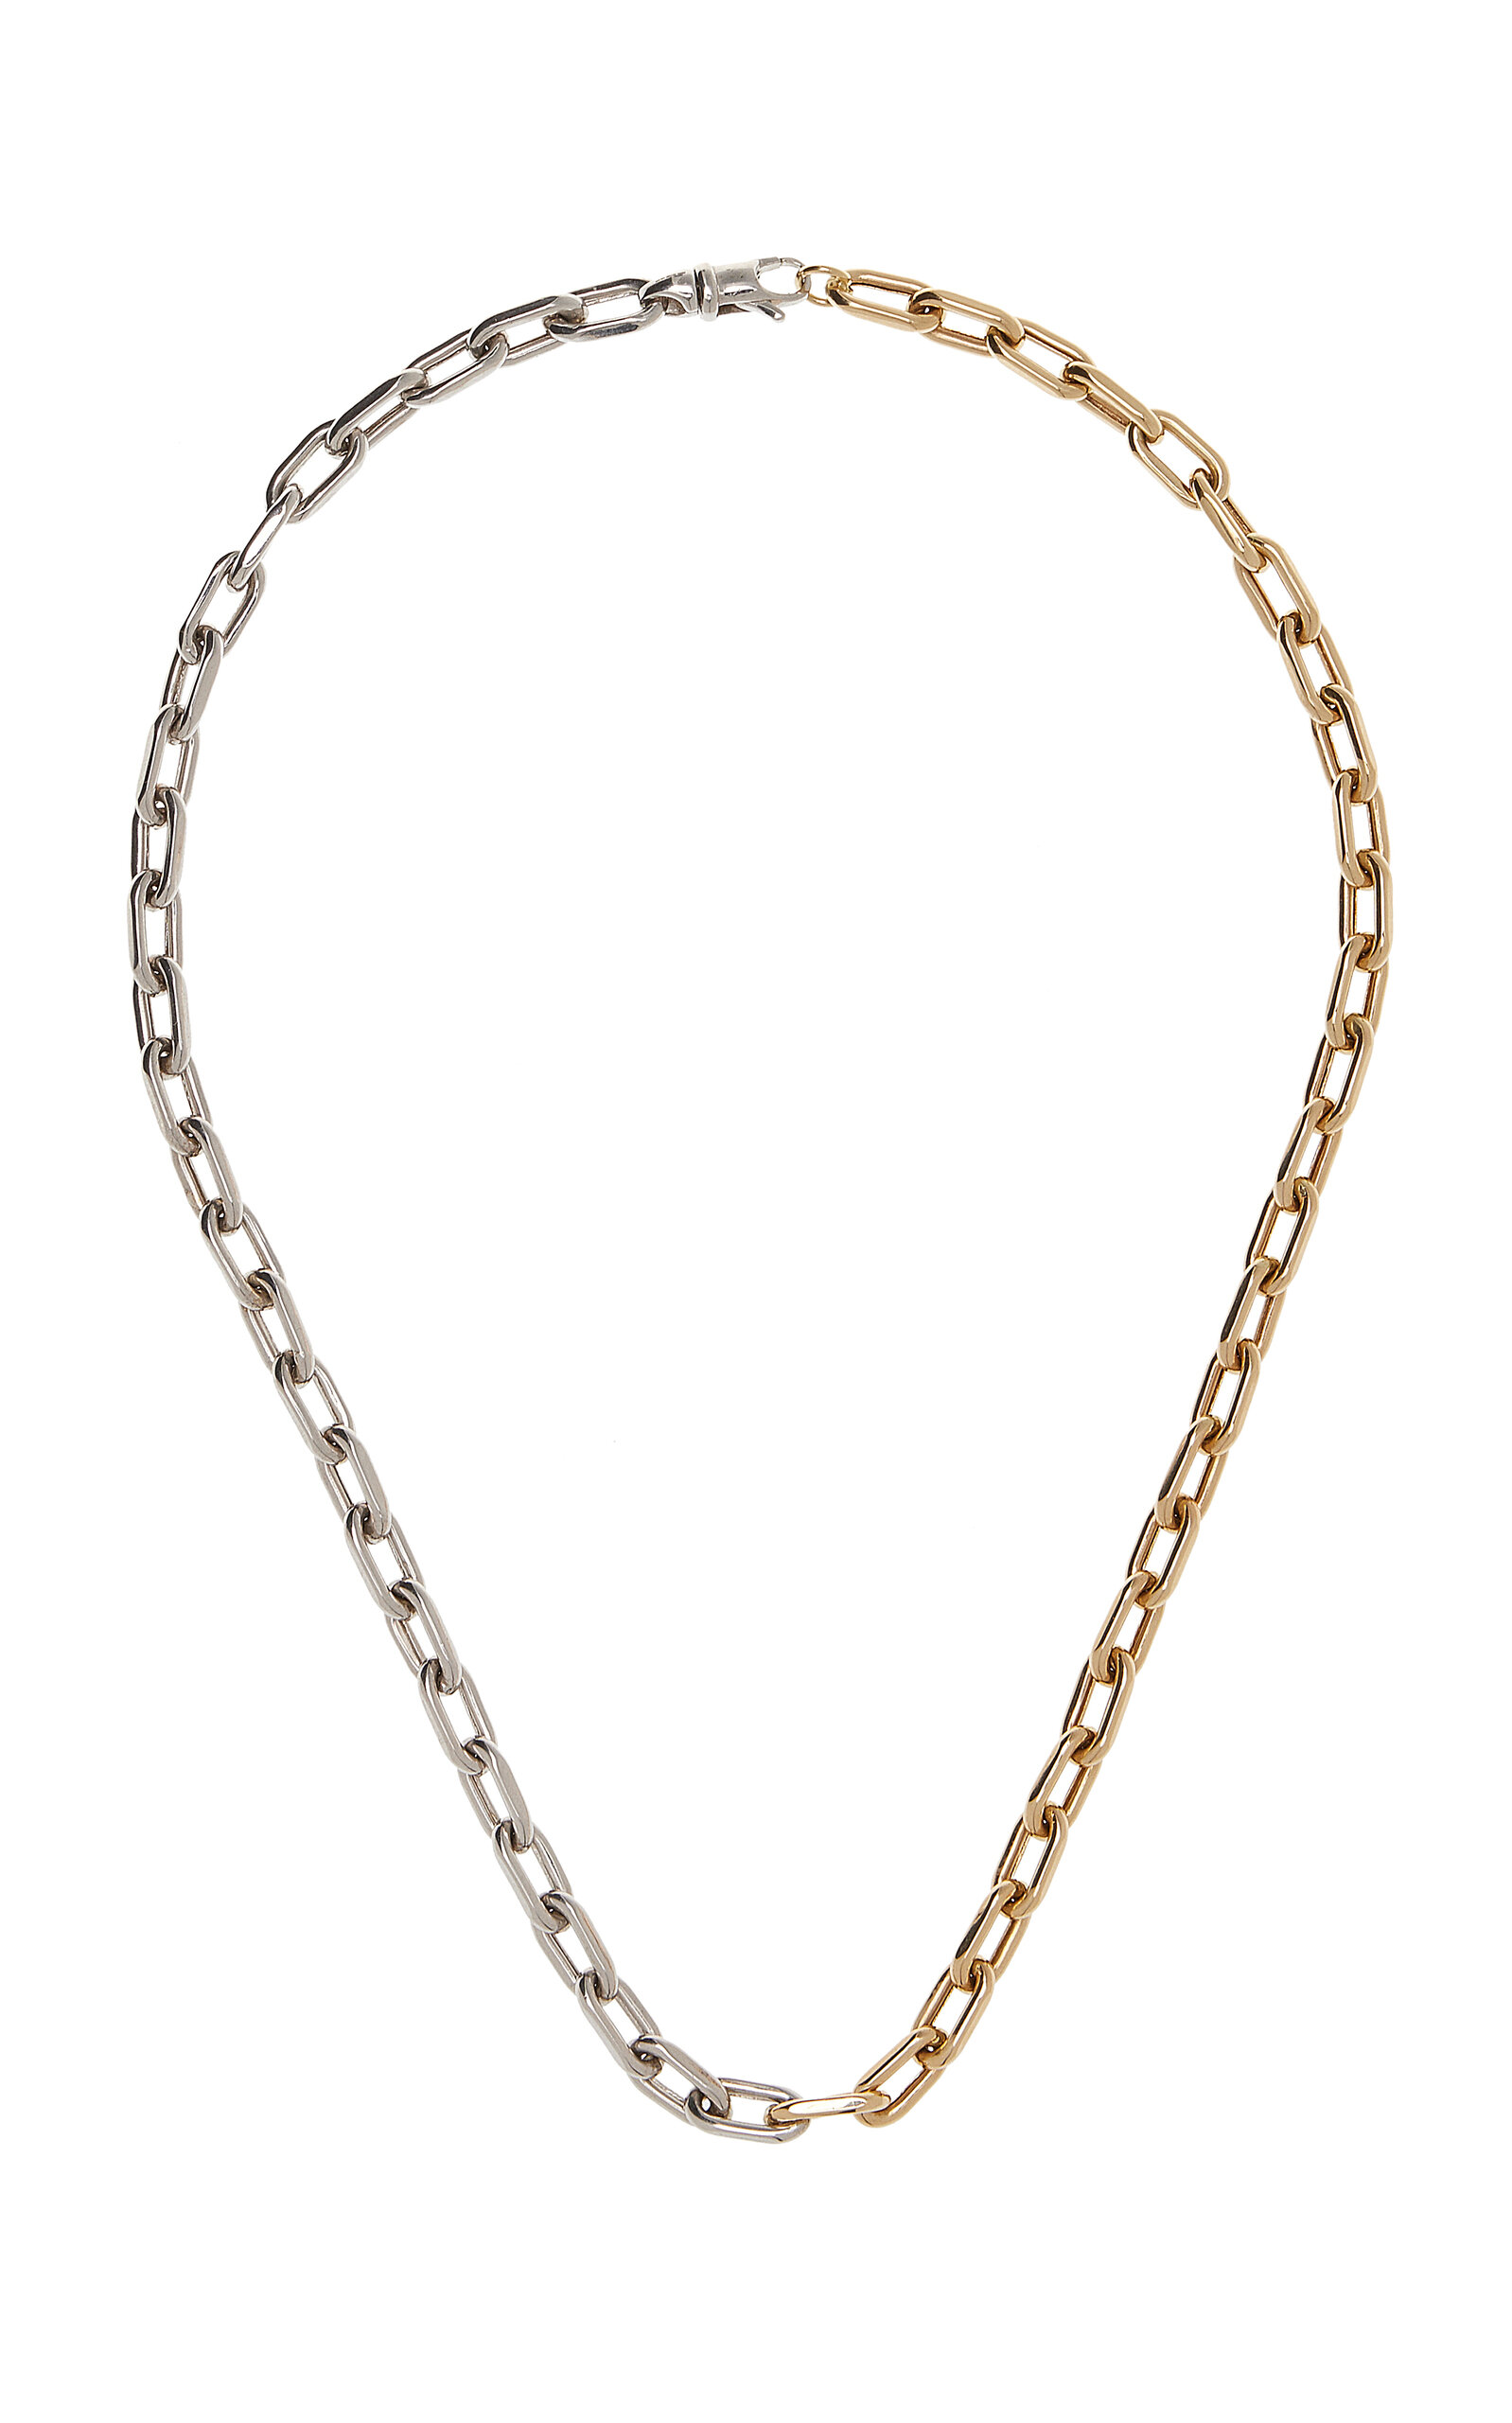 Adina Reyter Women's 14k Yellow Gold; Sterling Silver Chain Necklace